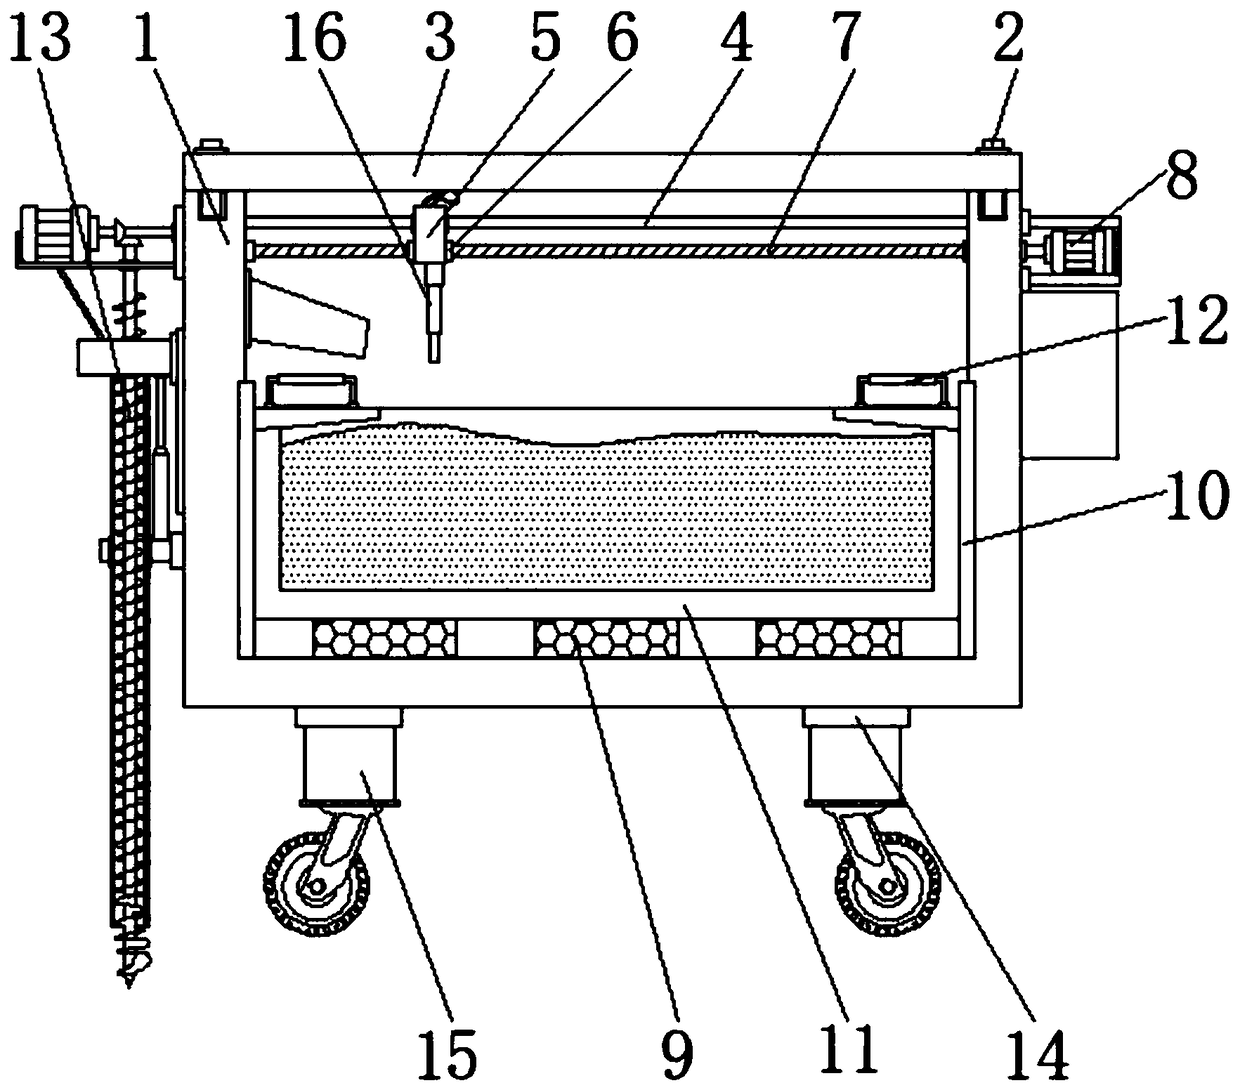 Soil collecting device with storage and detection functions